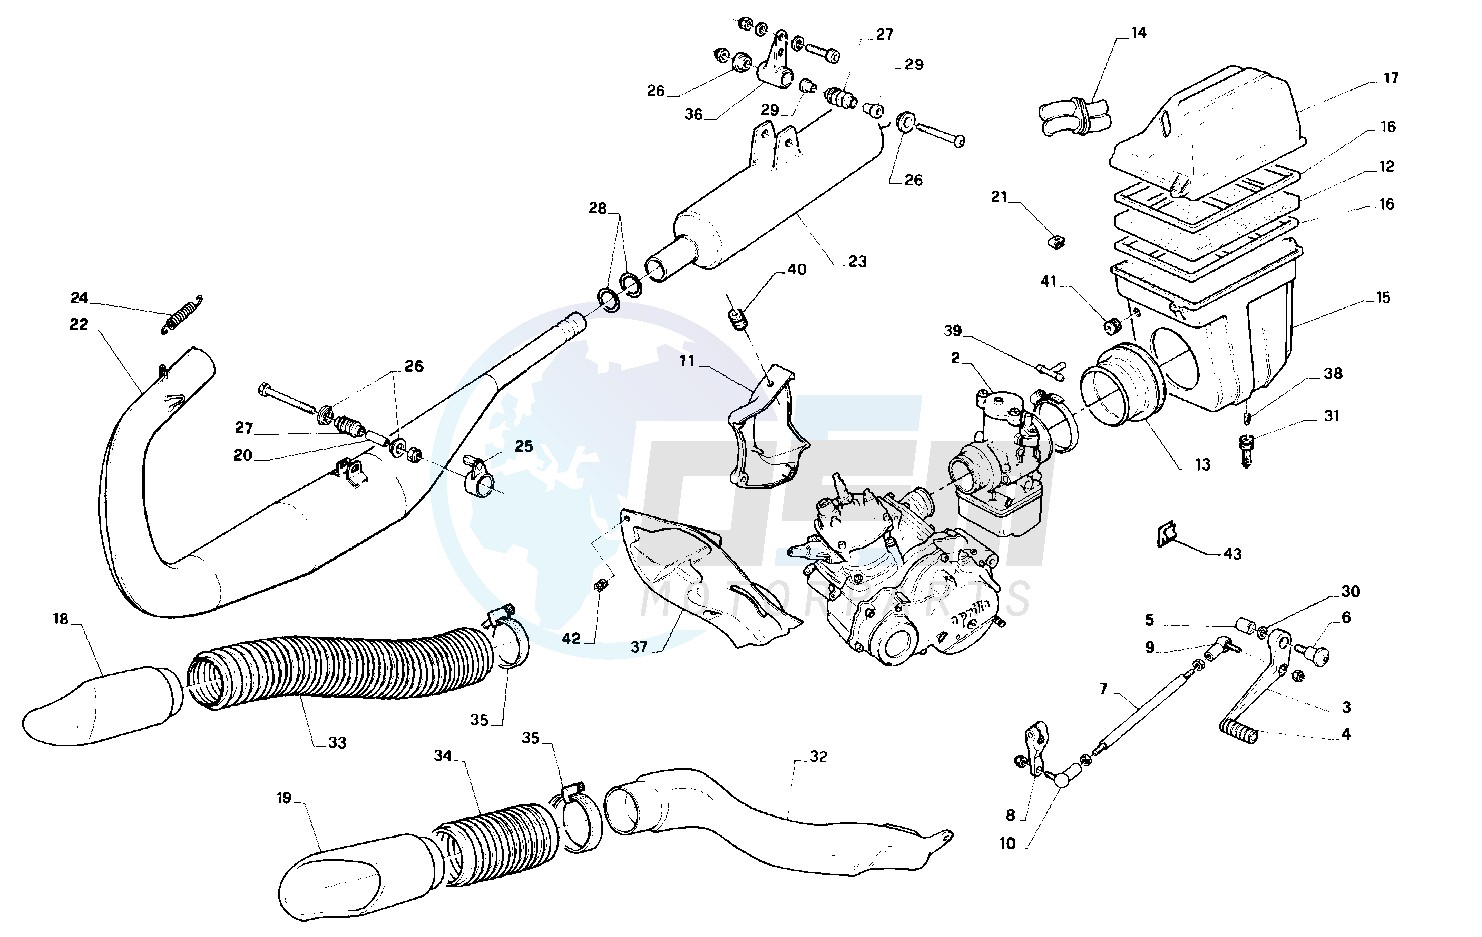 Exhaust system - airfilter image